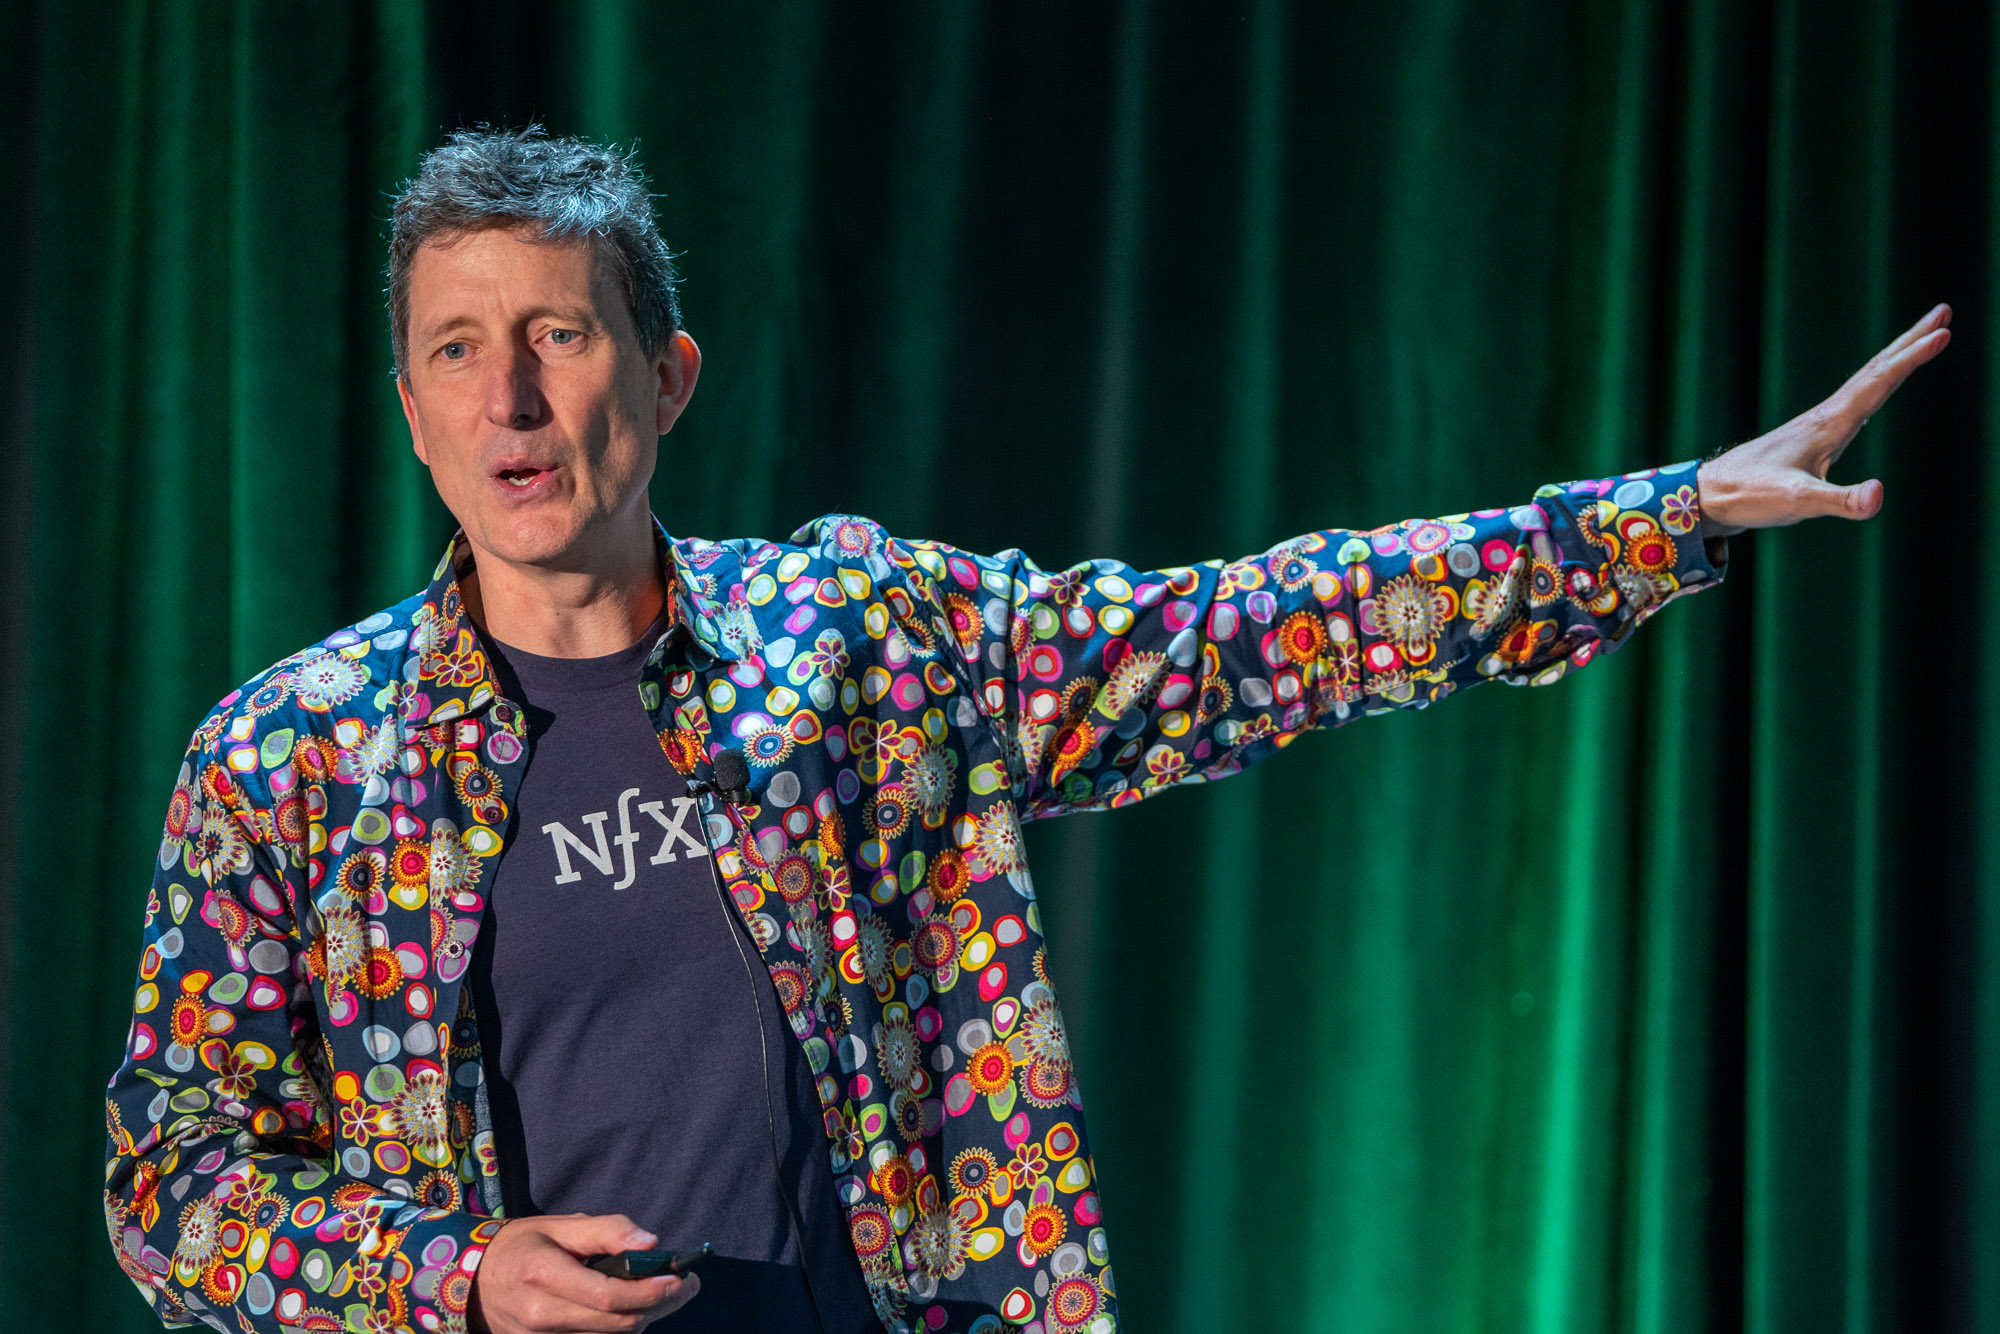 James Currier, GP at NfX talks about "Where Unicorn Ideas Come From" at TechCrunch Early Stage in Boston on April 20, 2023. Image Credit: Haje Kamps/TechCrunch